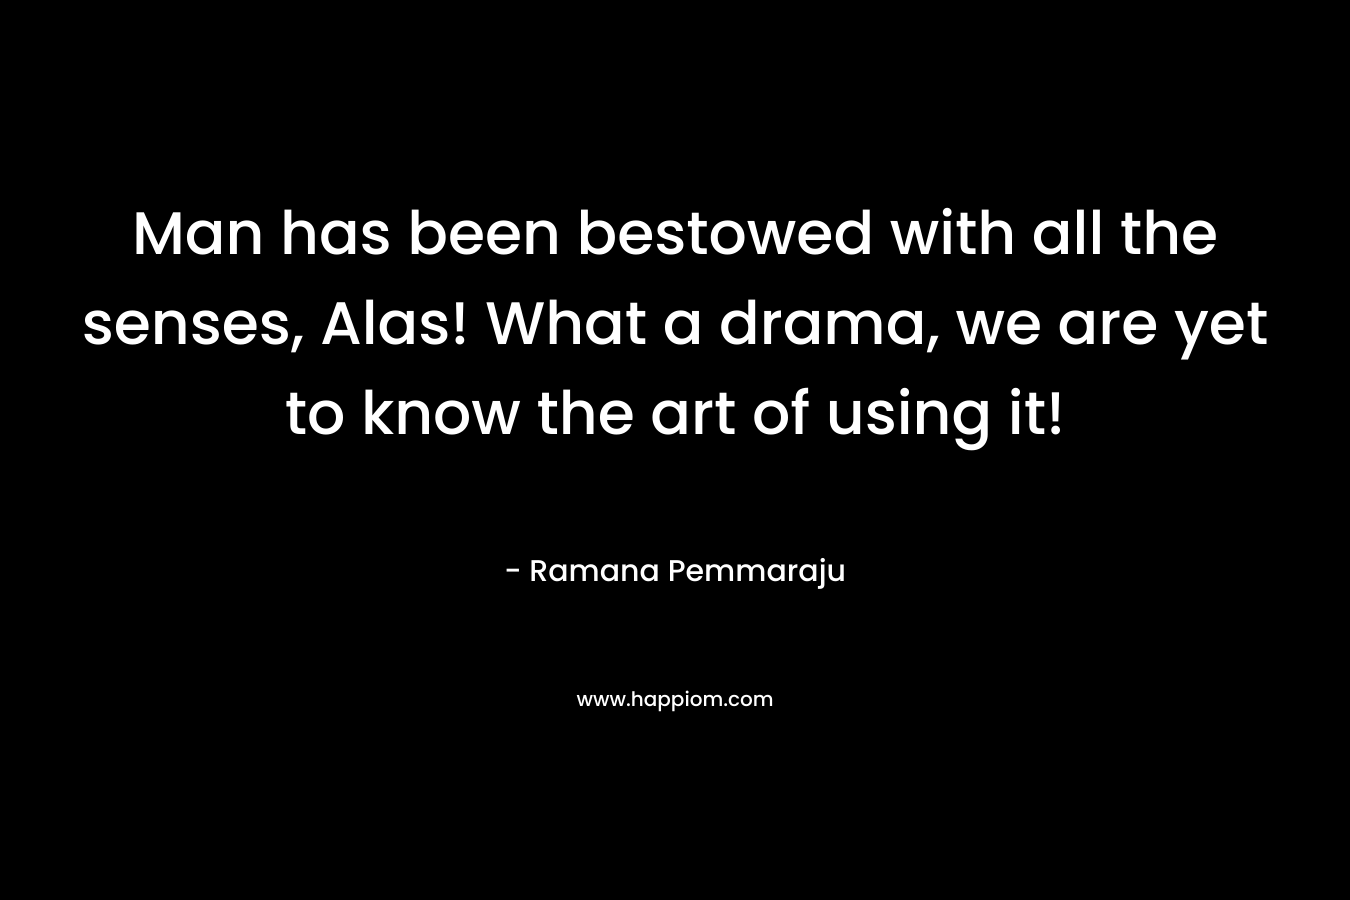 Man has been bestowed with all the senses, Alas! What a drama, we are yet to know the art of using it! – Ramana Pemmaraju